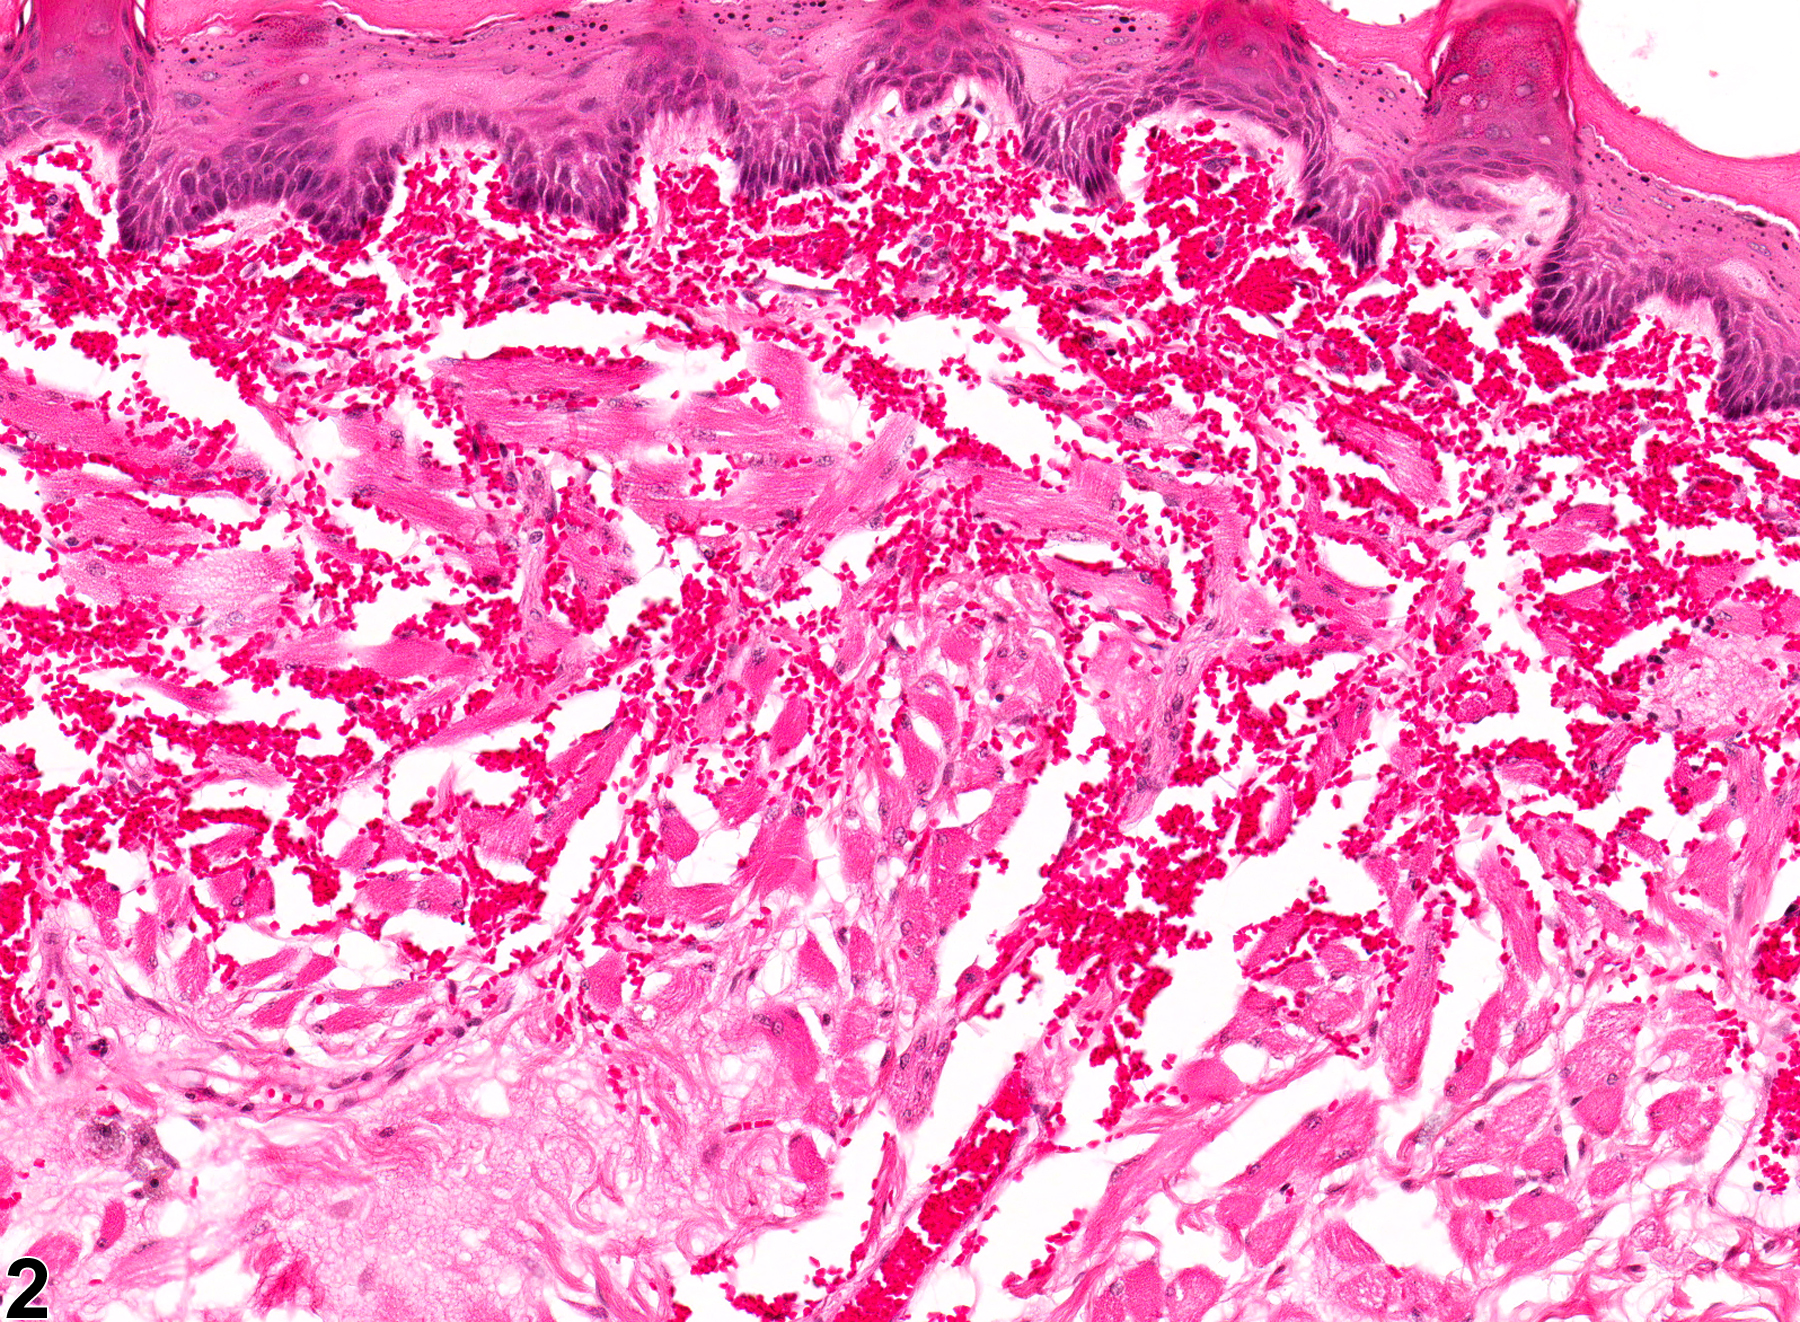 Image of hemorrhage in the tongue from a female F344/N rat in a chronic study